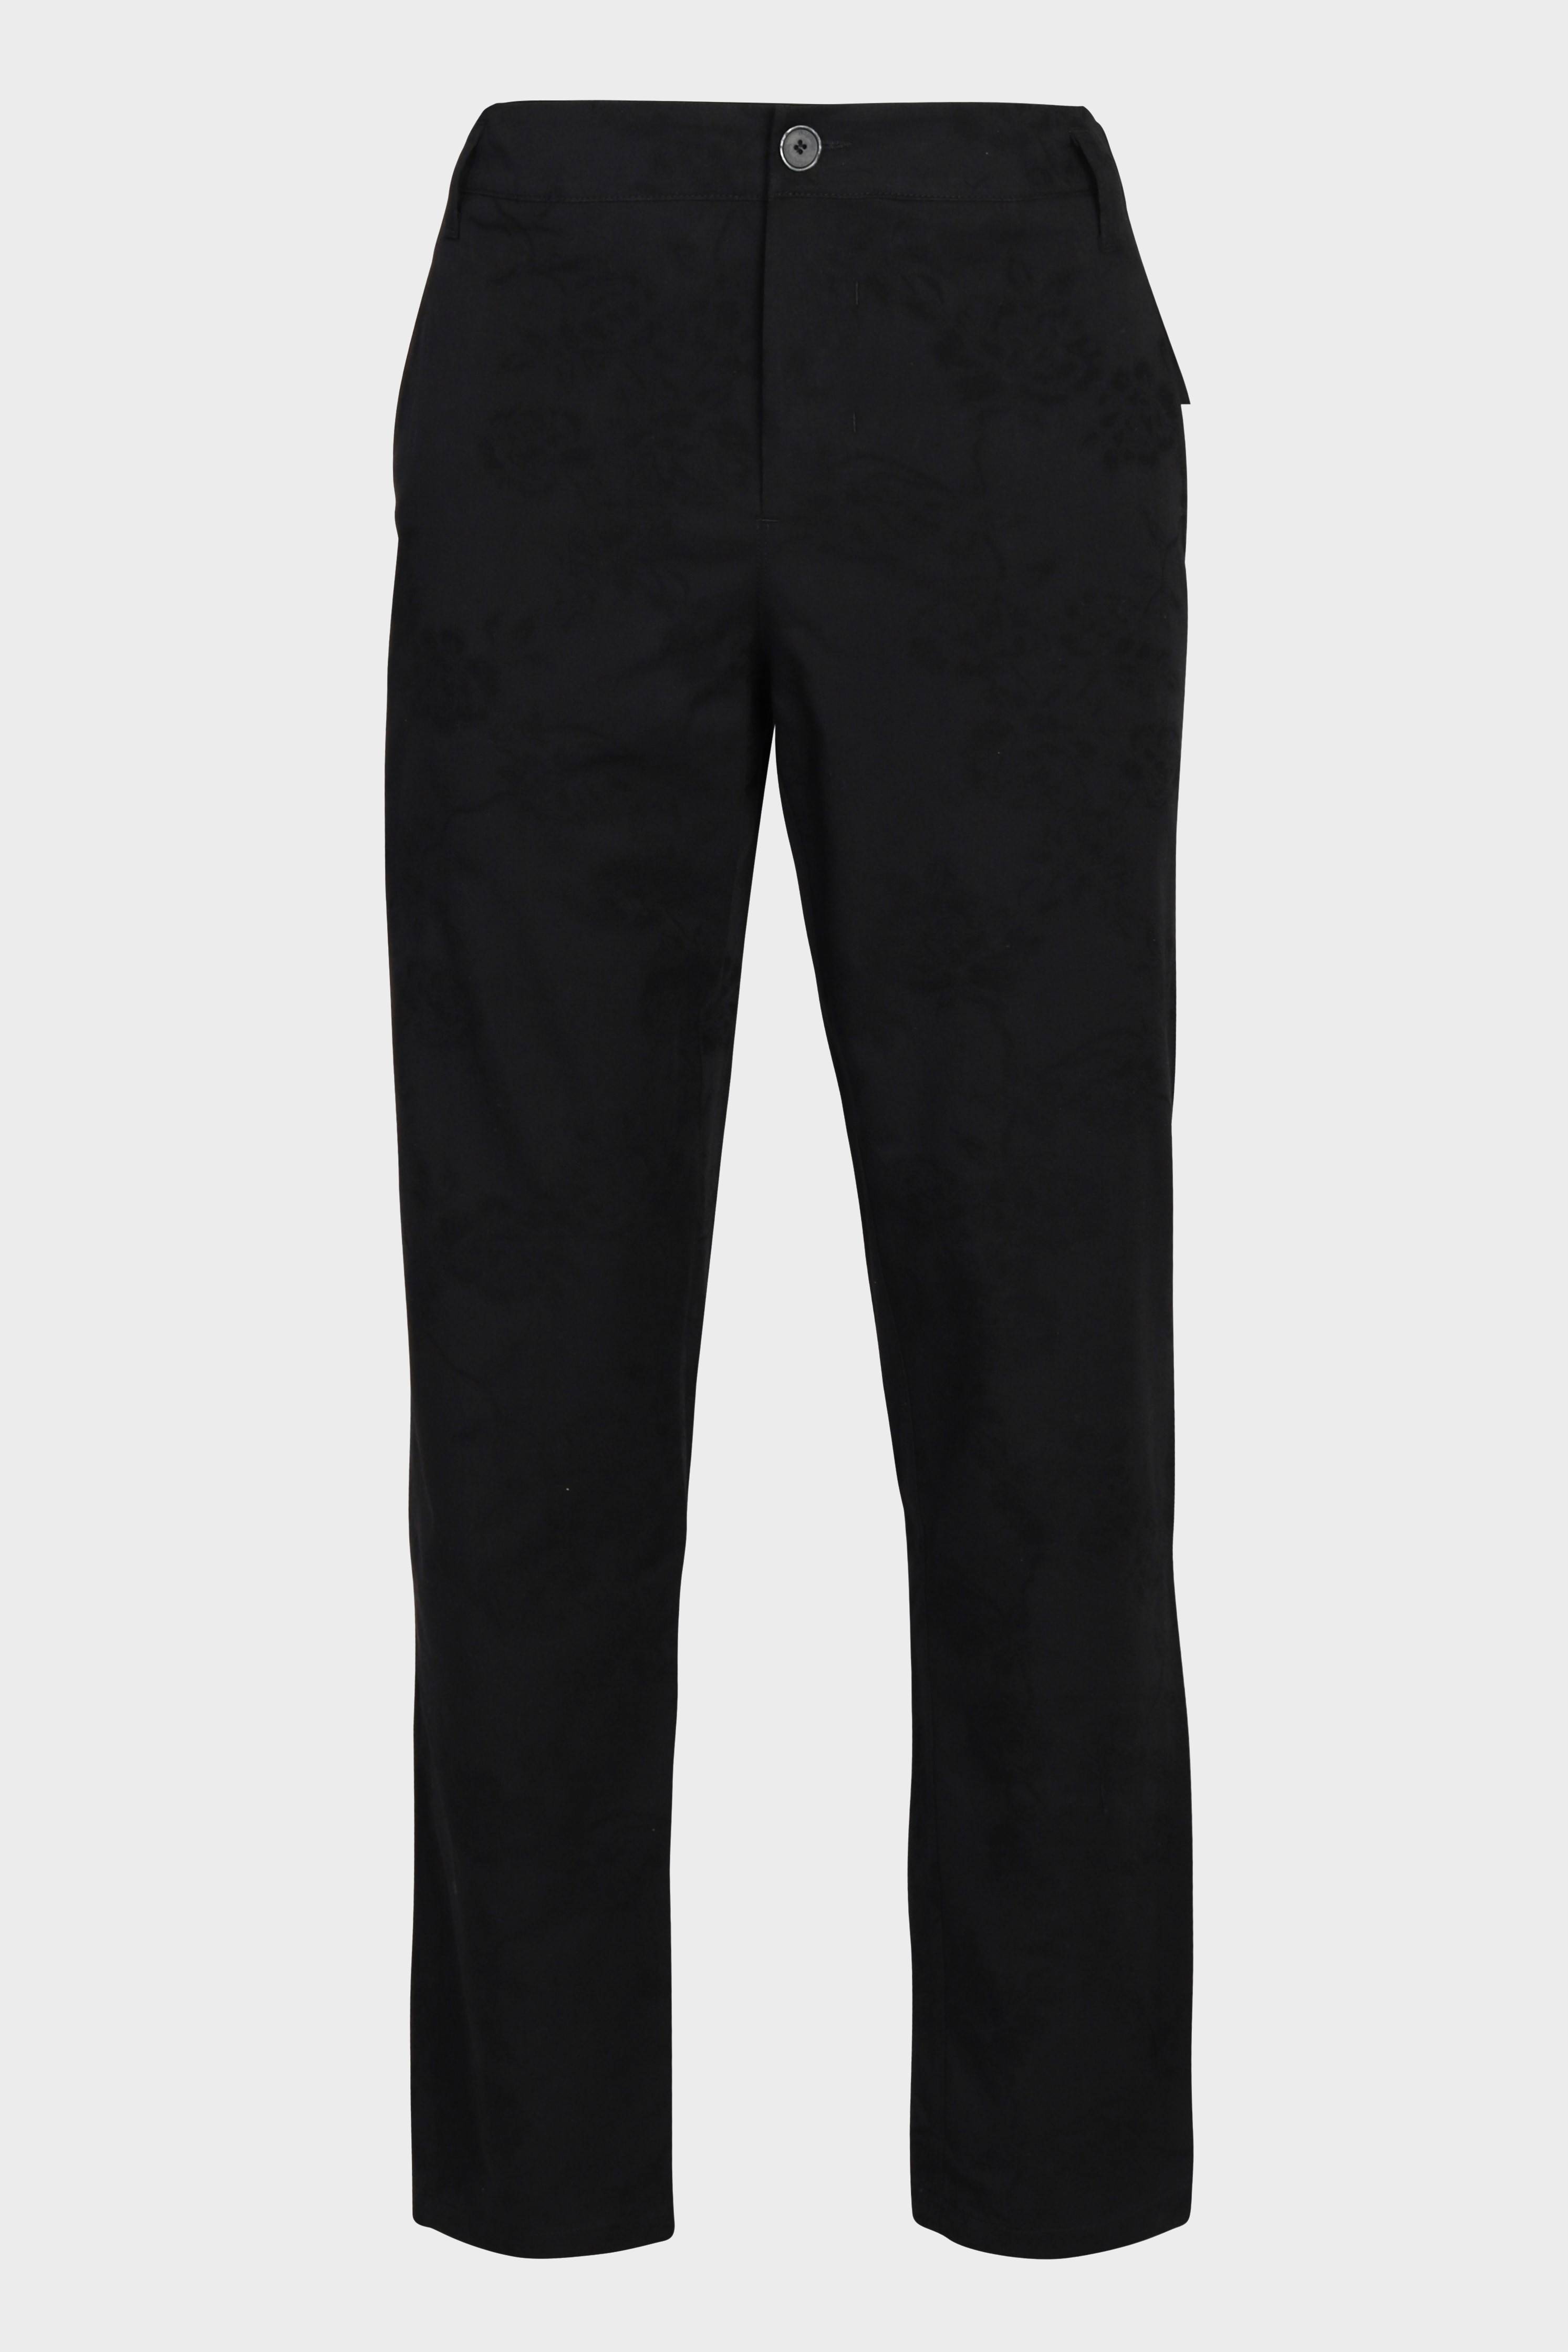 HANNIBAL. Embroidered Trouser Hannes in Black 50